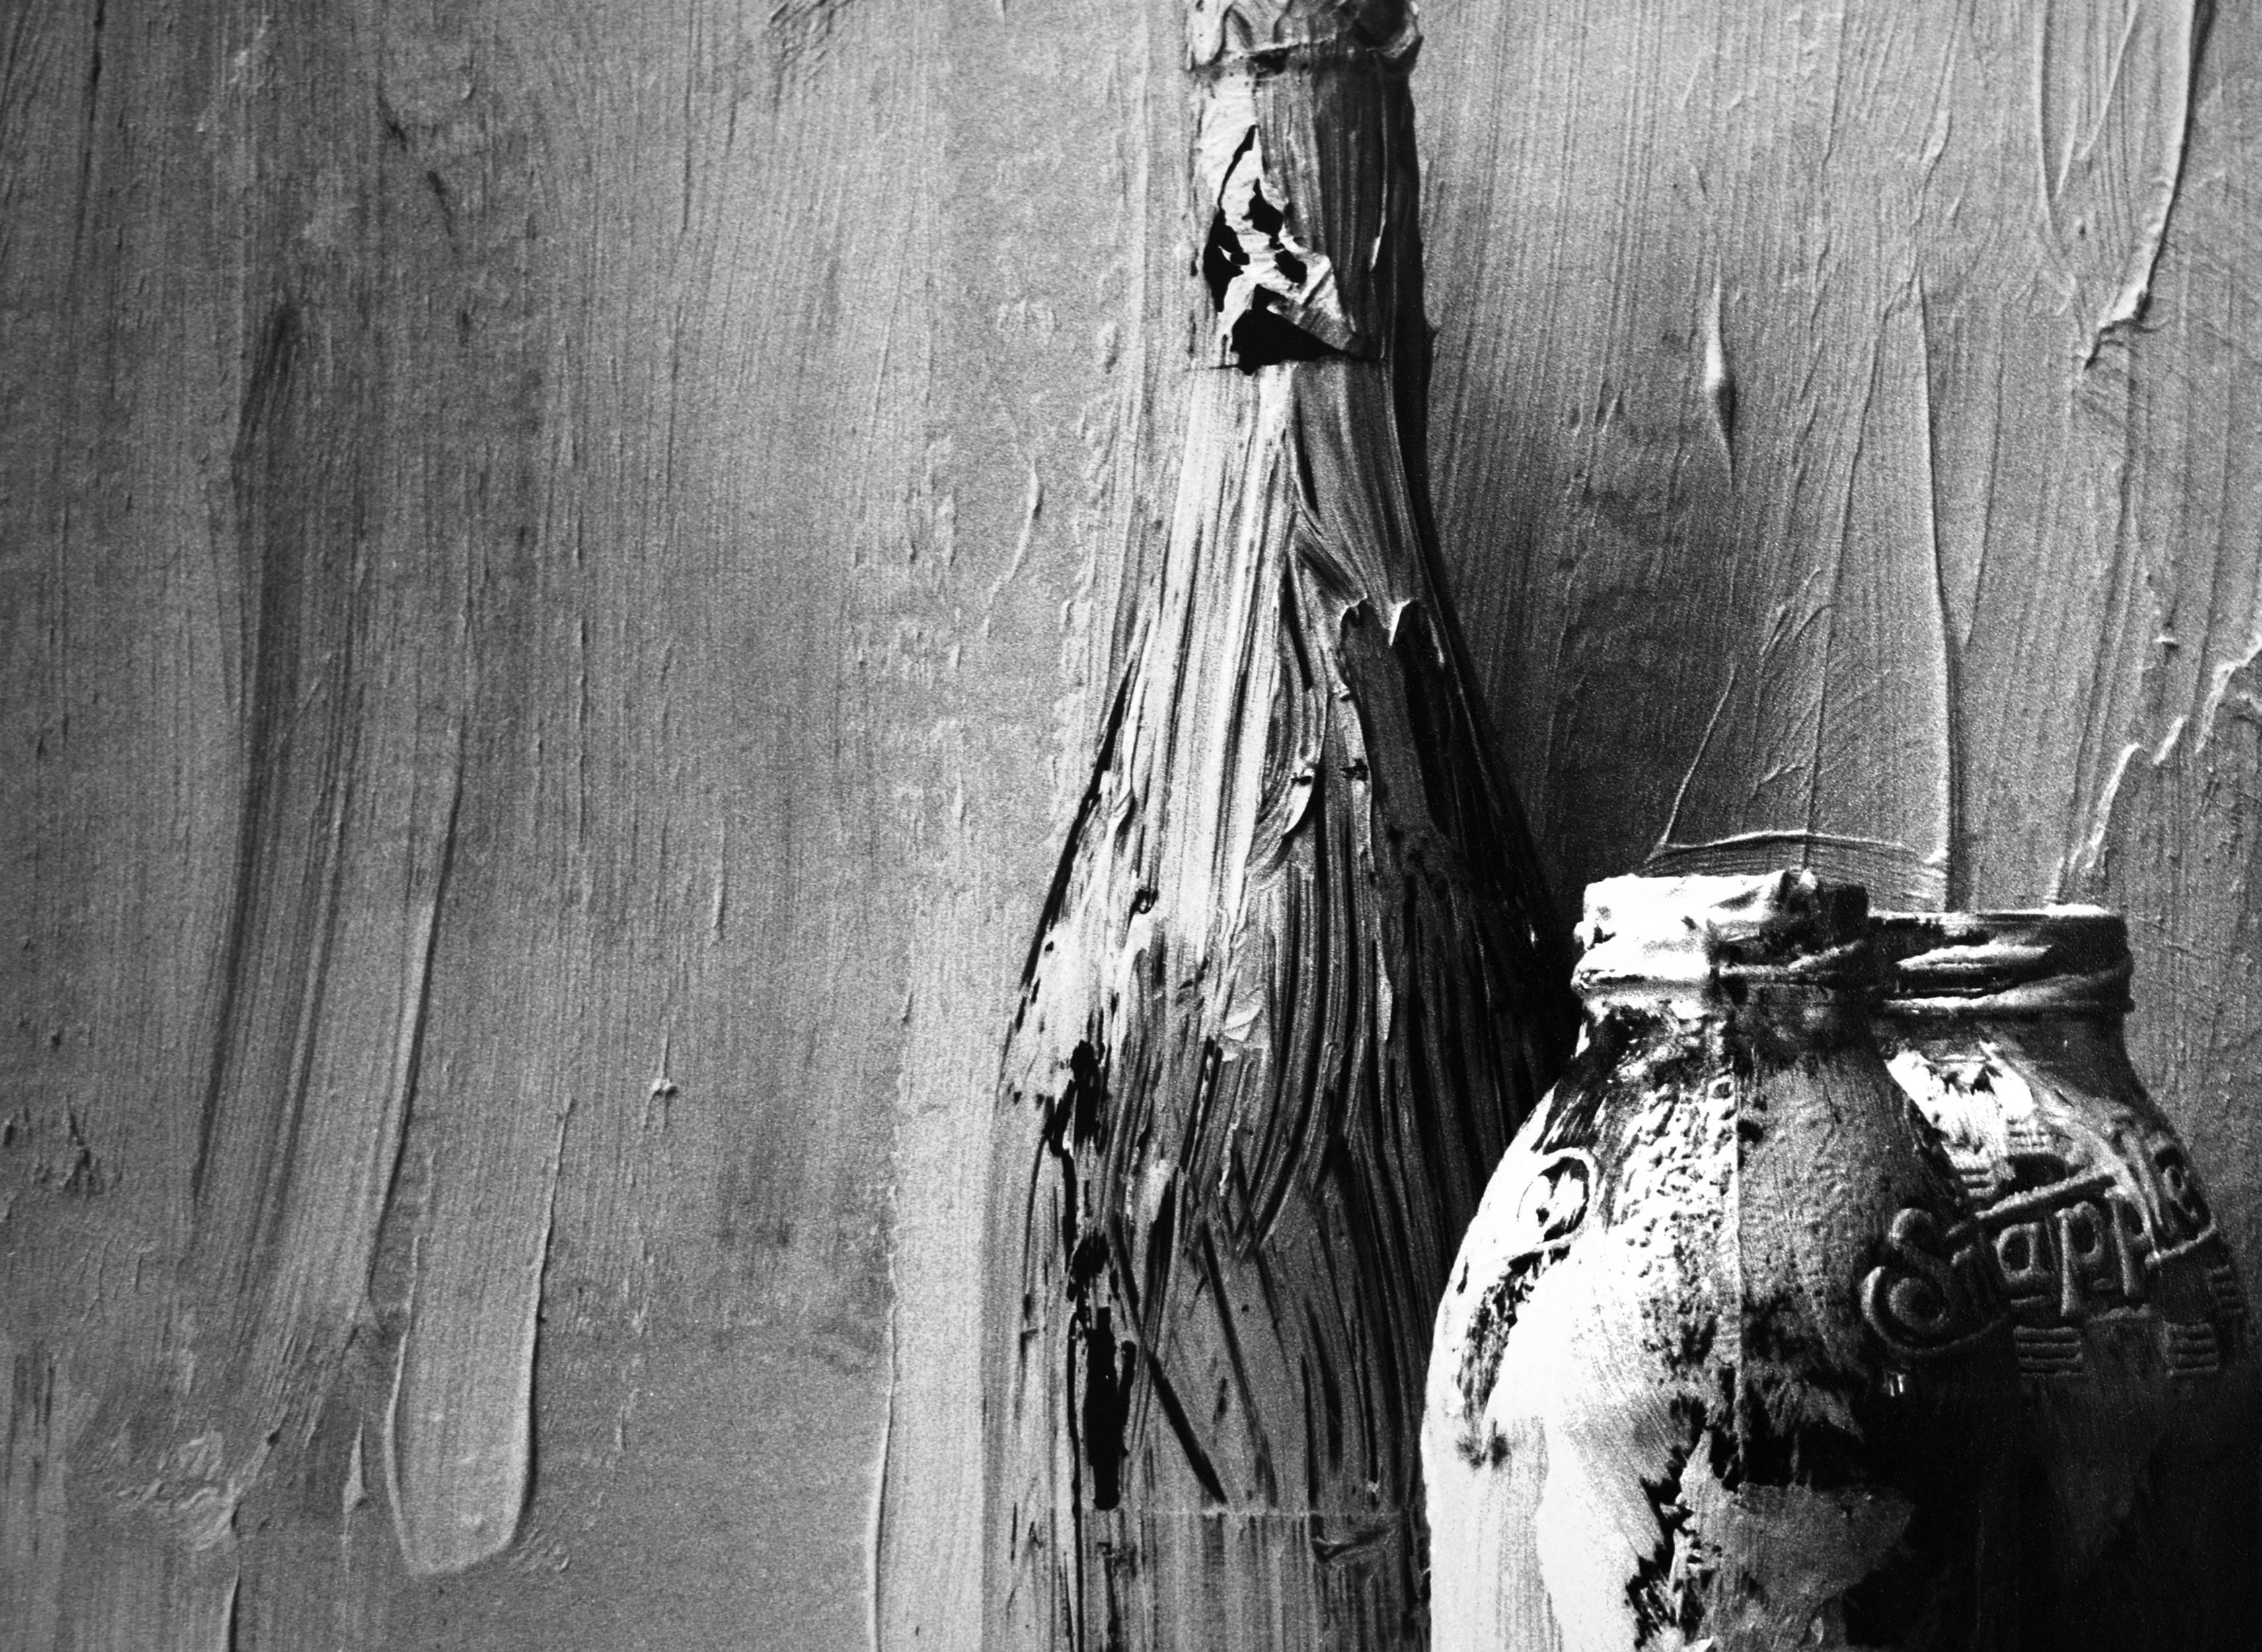 Homage to Morandi, Black and white still life photography, Painted Bottles - Print by Alexandra Catiere